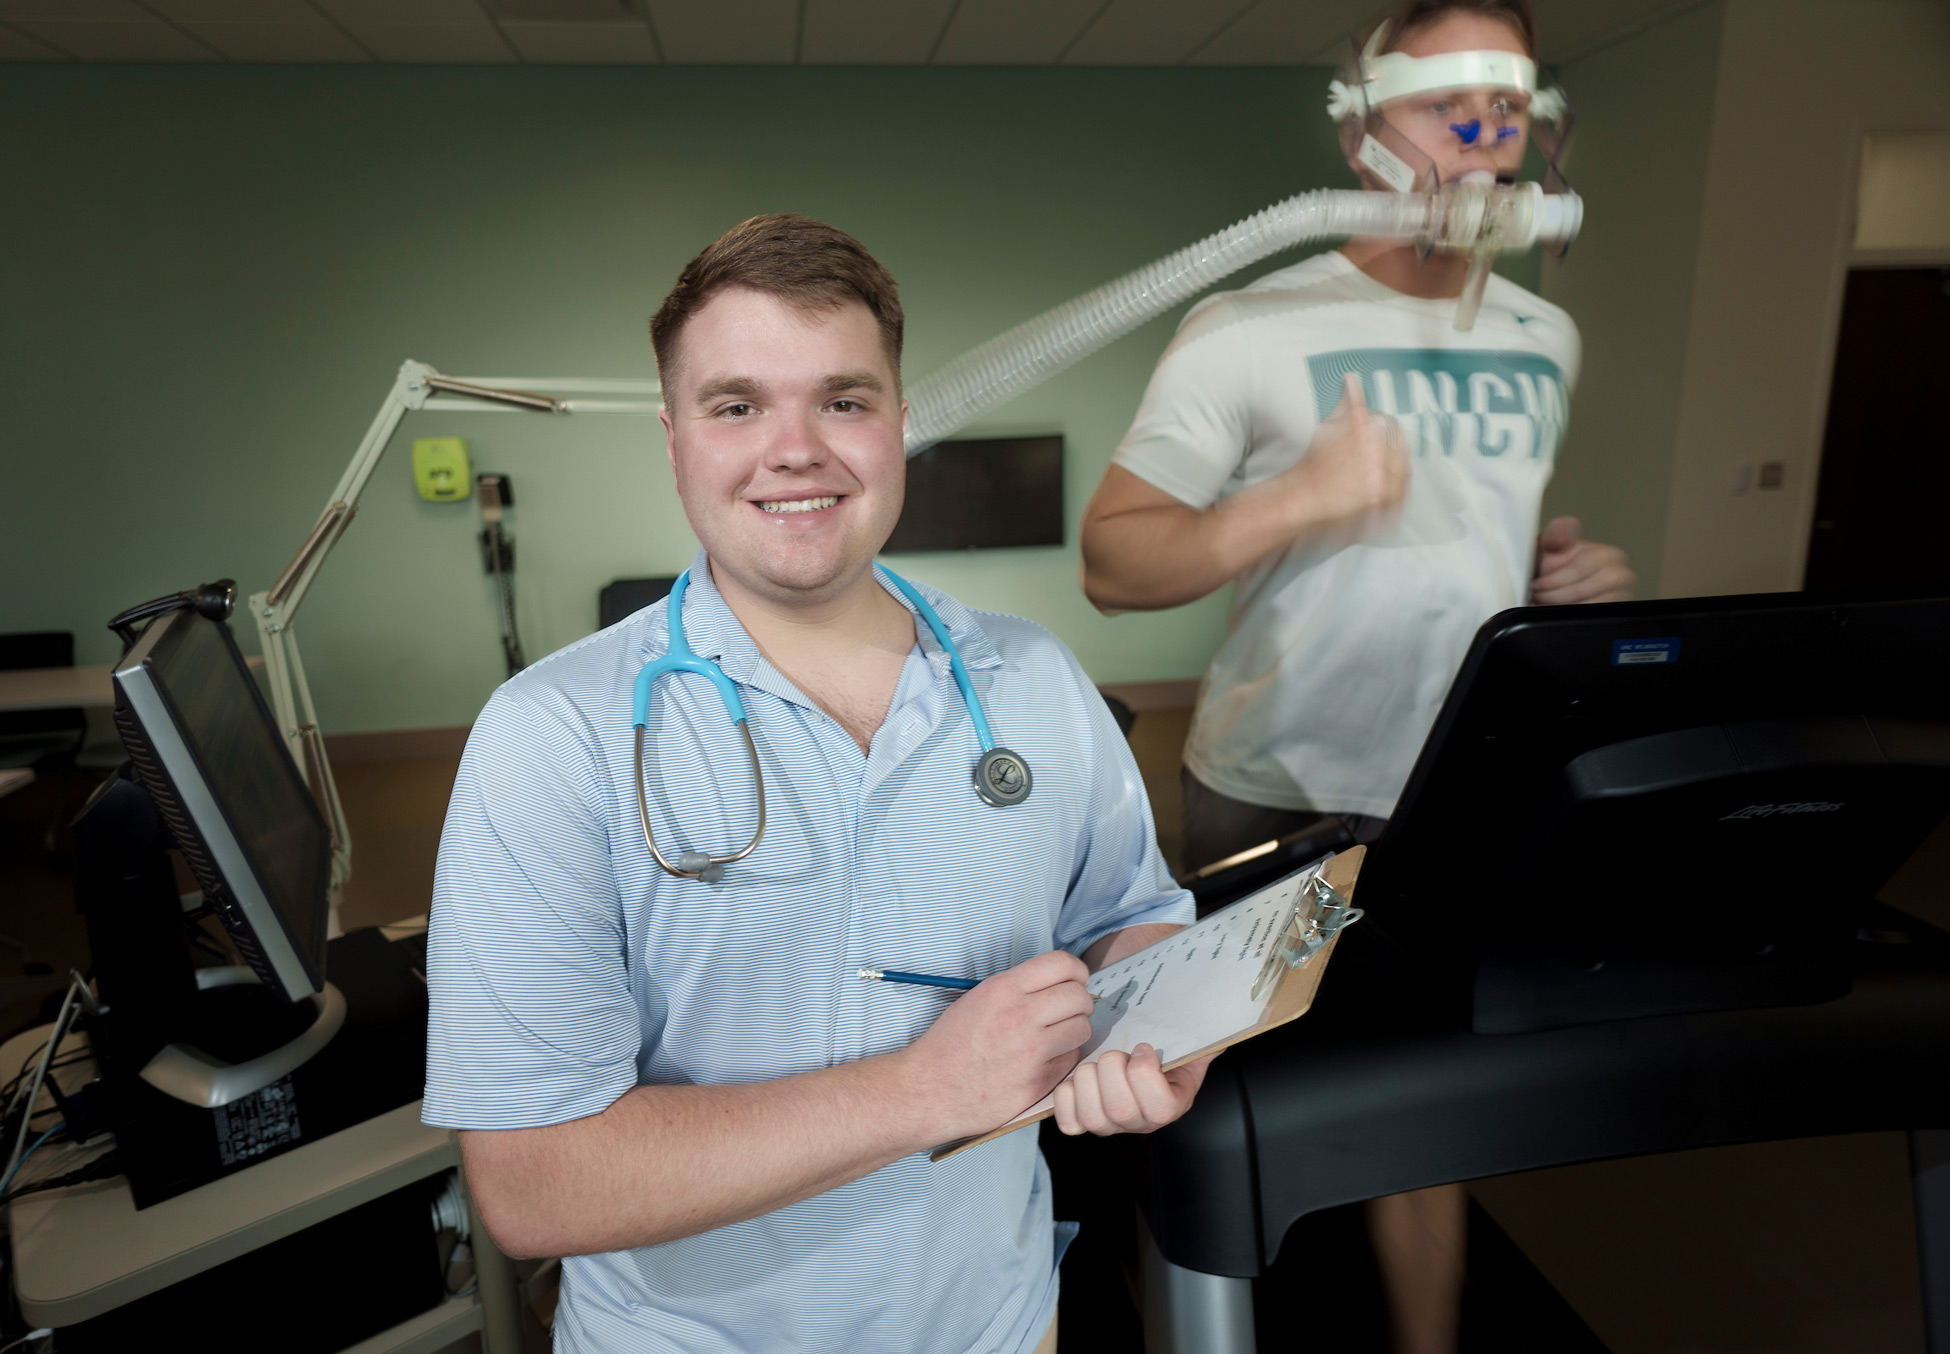 Nolan Byrd’s desire to have a fulfilling career after UNCW led him to the exercise science field.